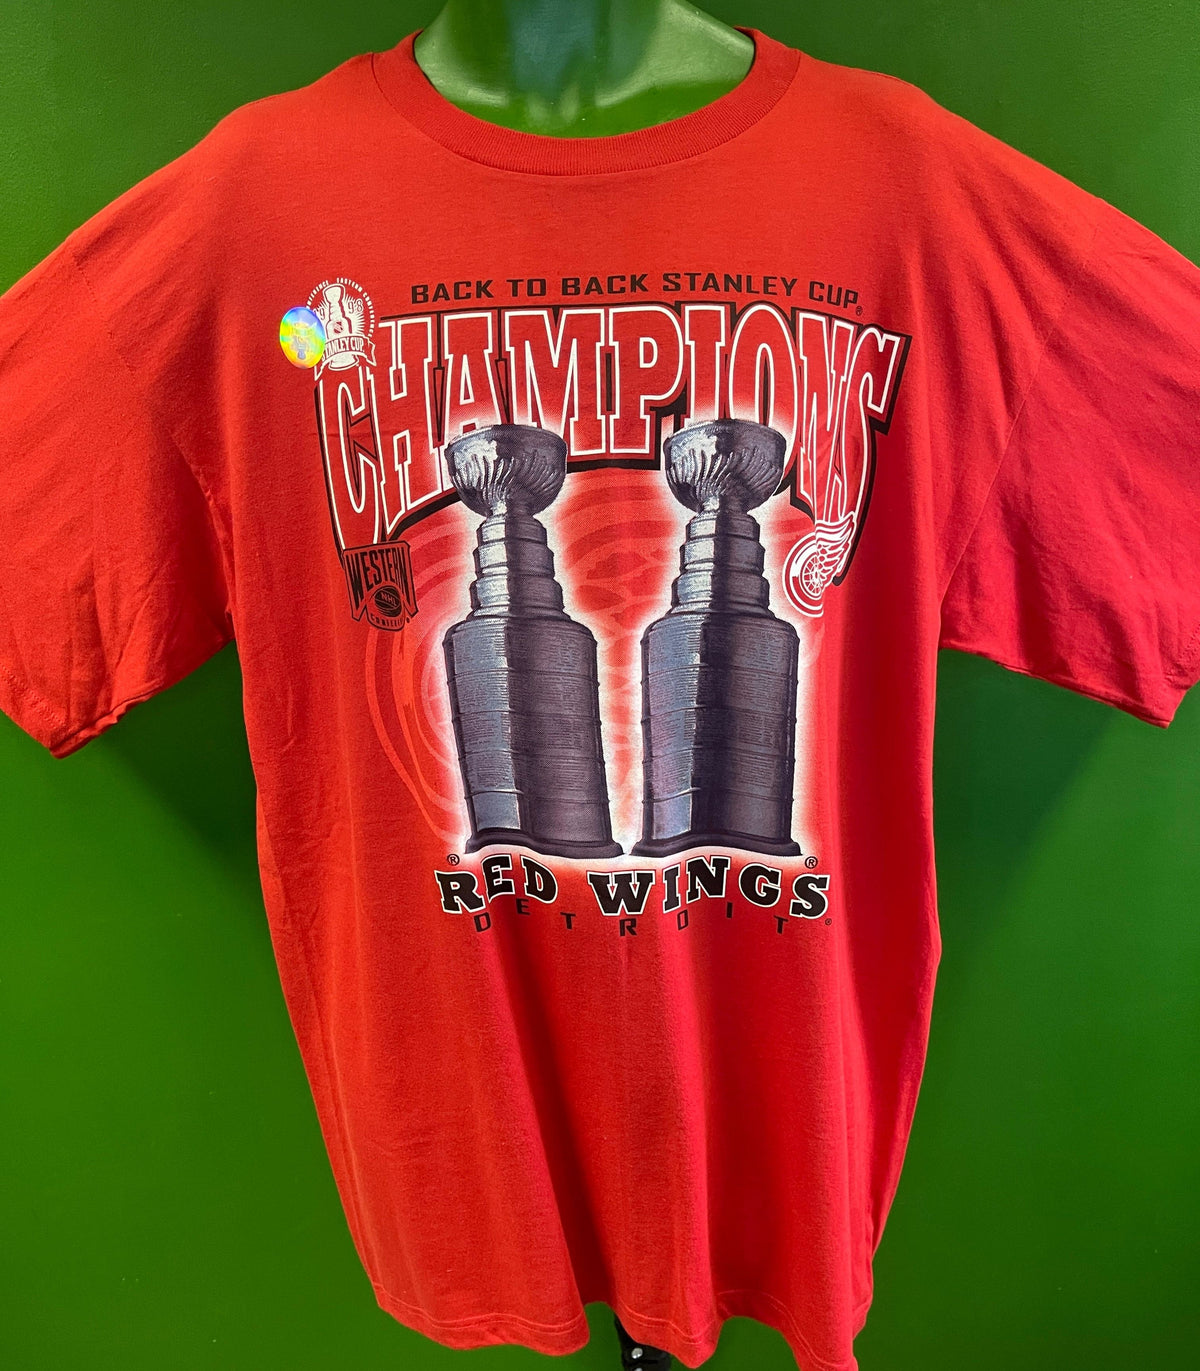 NHL Detroit Red Wings Back to Back Champions T-Shirt Men's 2X-Large NWT